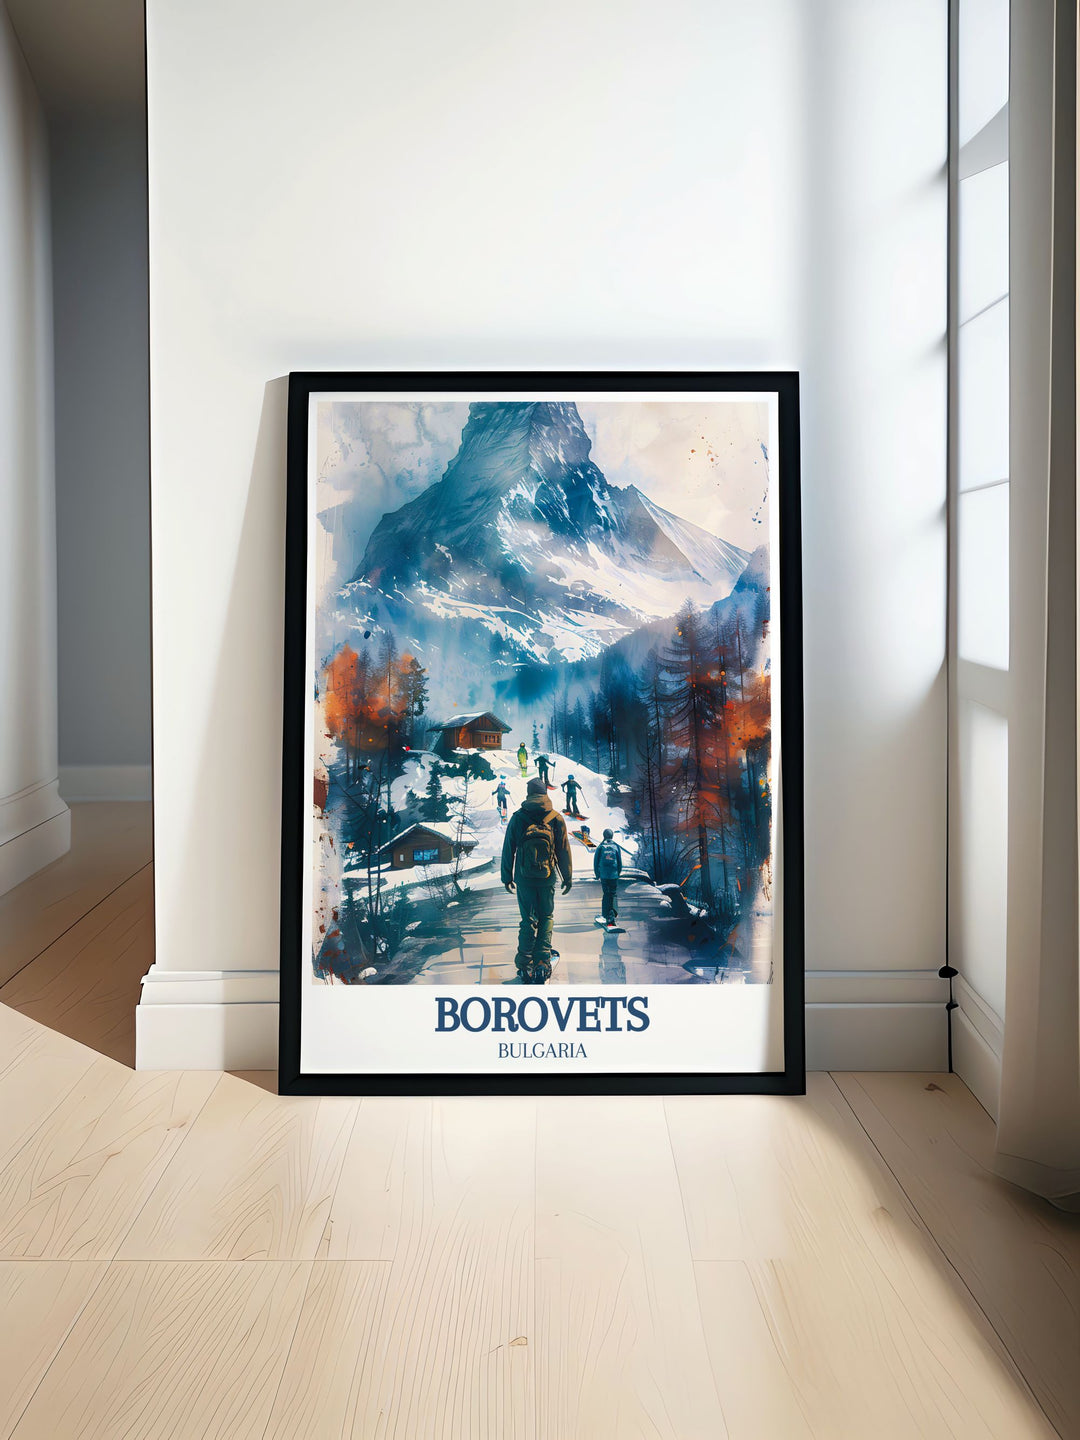 Captivating Borovets travel poster featuring the alpine resort and the scenic Musala Pathway, perfect for adding Bulgarias natural charm and skiing culture to your decor.